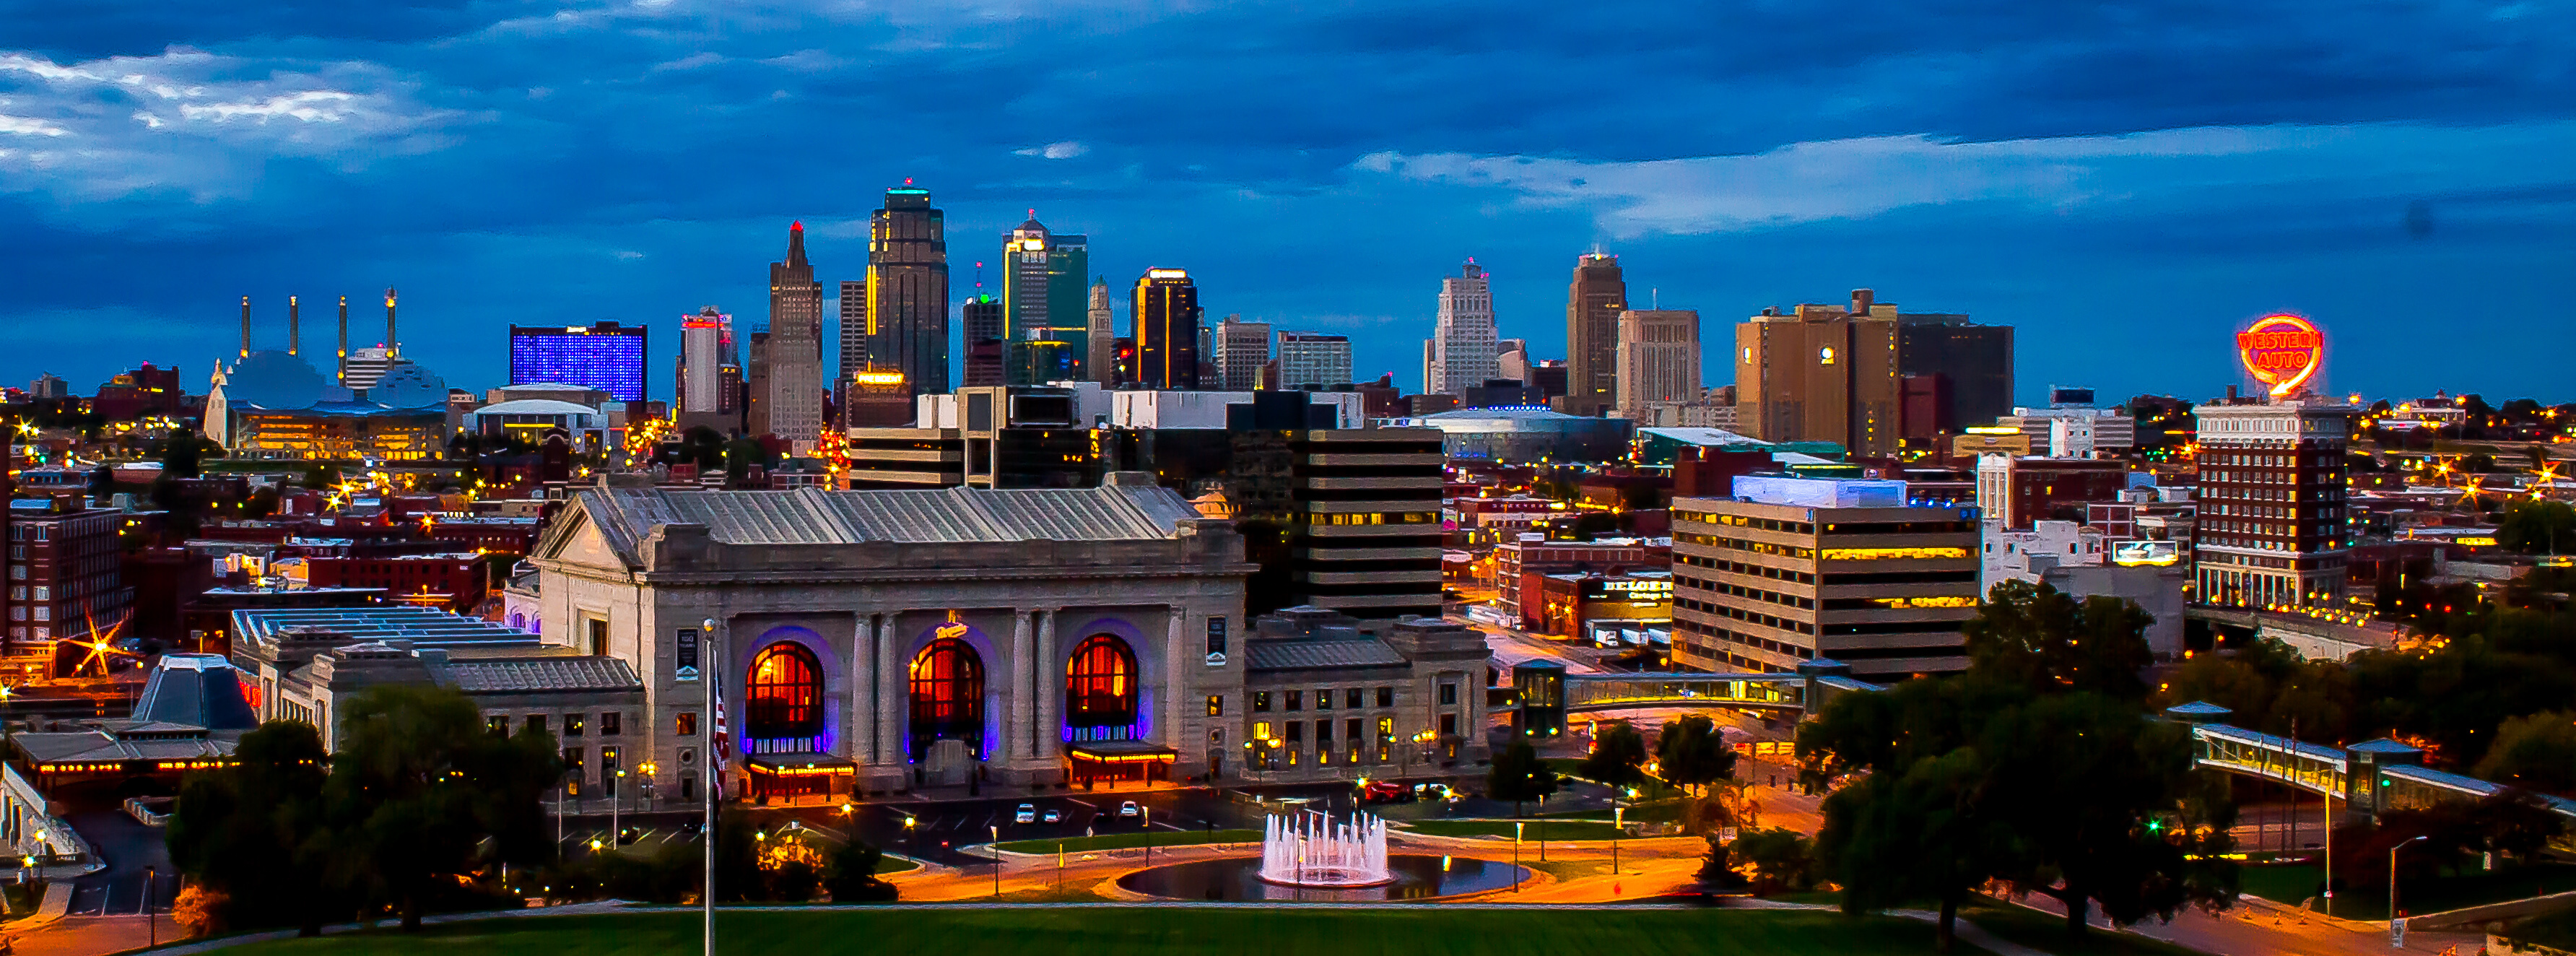 Kansas City: One of the two county seats of Jackson County, along with city of Independence. 3570x1330 Dual Screen Background.